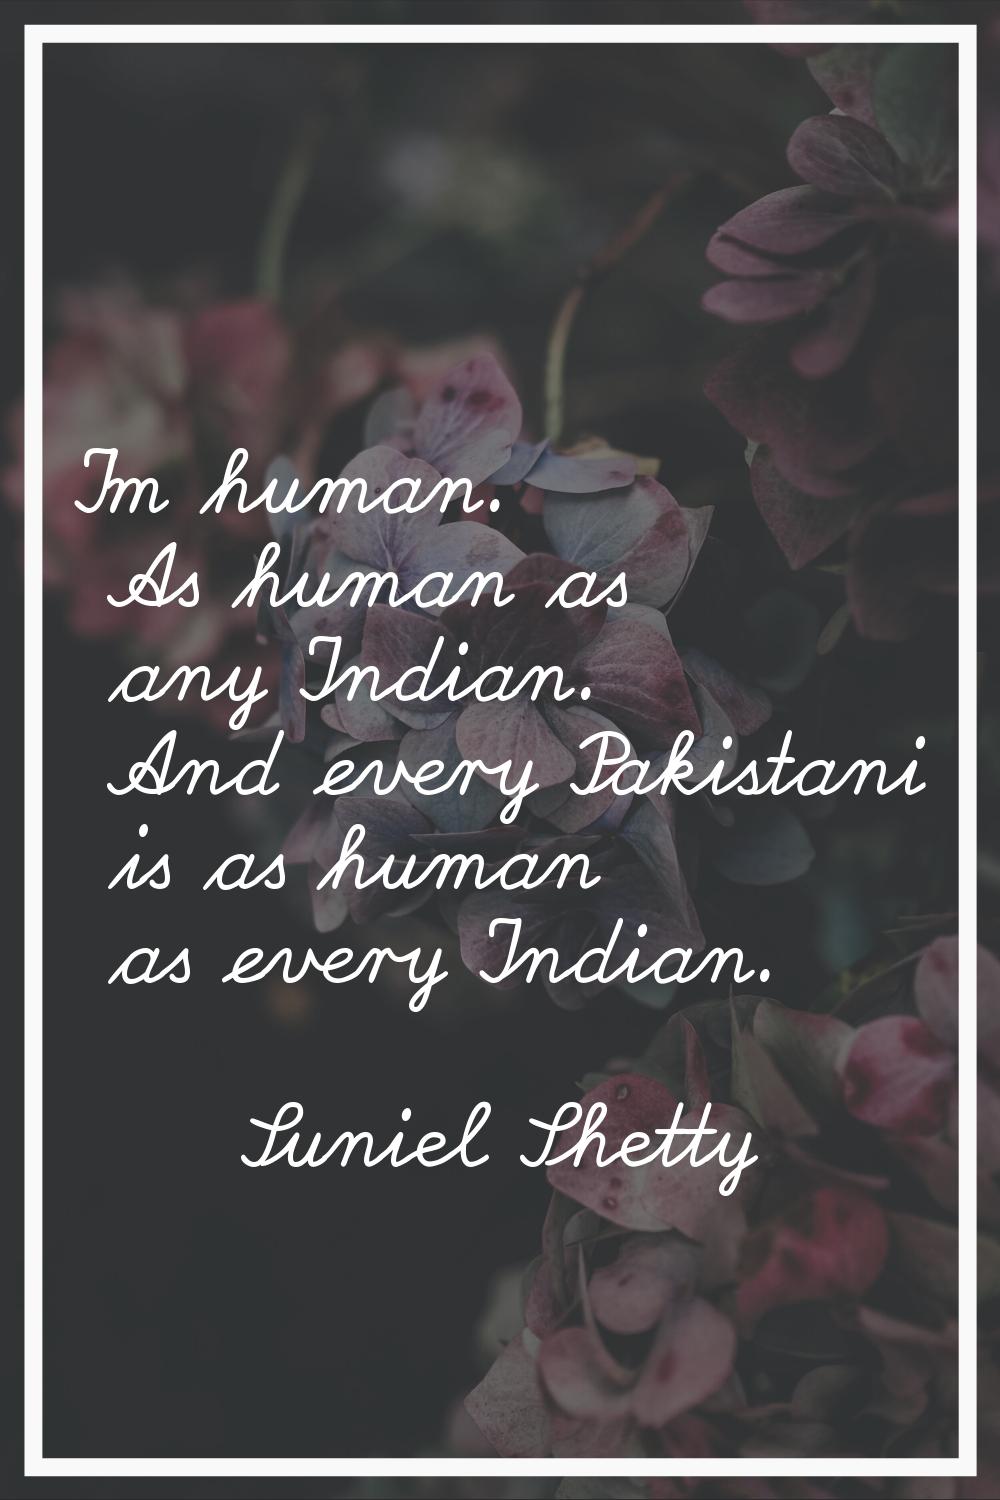 I'm human. As human as any Indian. And every Pakistani is as human as every Indian.